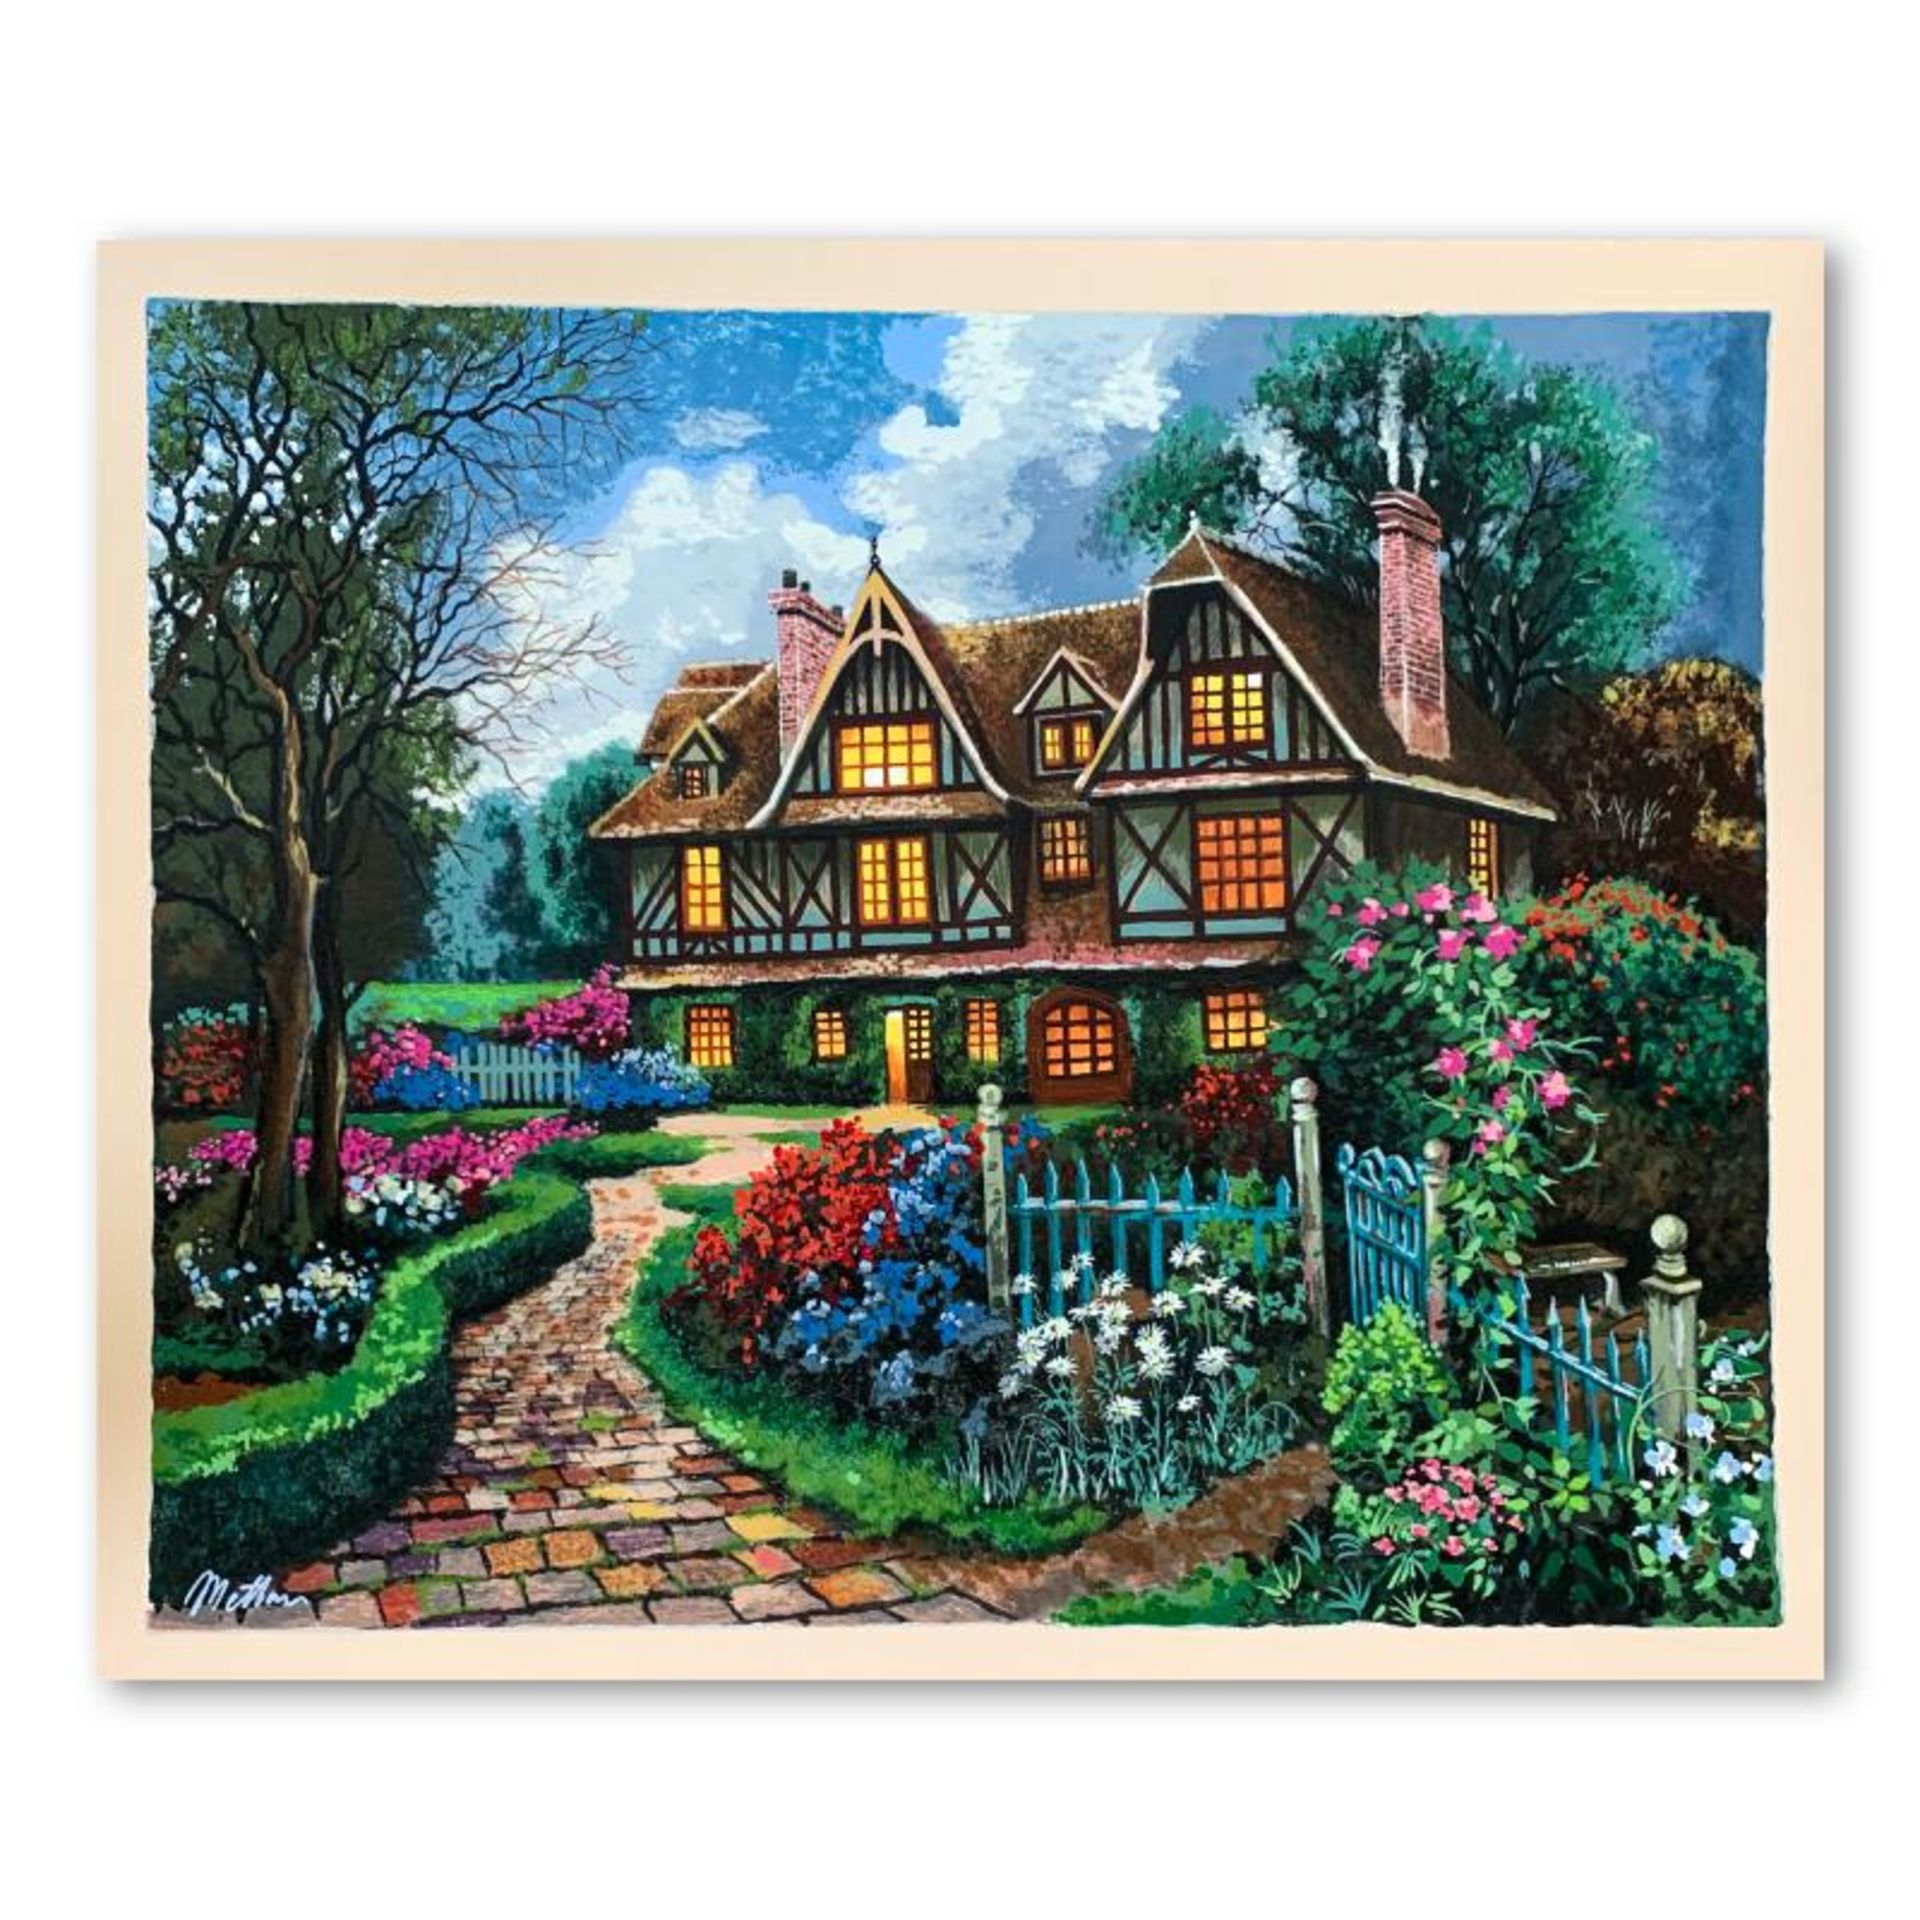 Anatoly Metlan, "Country Cottage" Hand Signed Limited Edition Serigraph on Paper